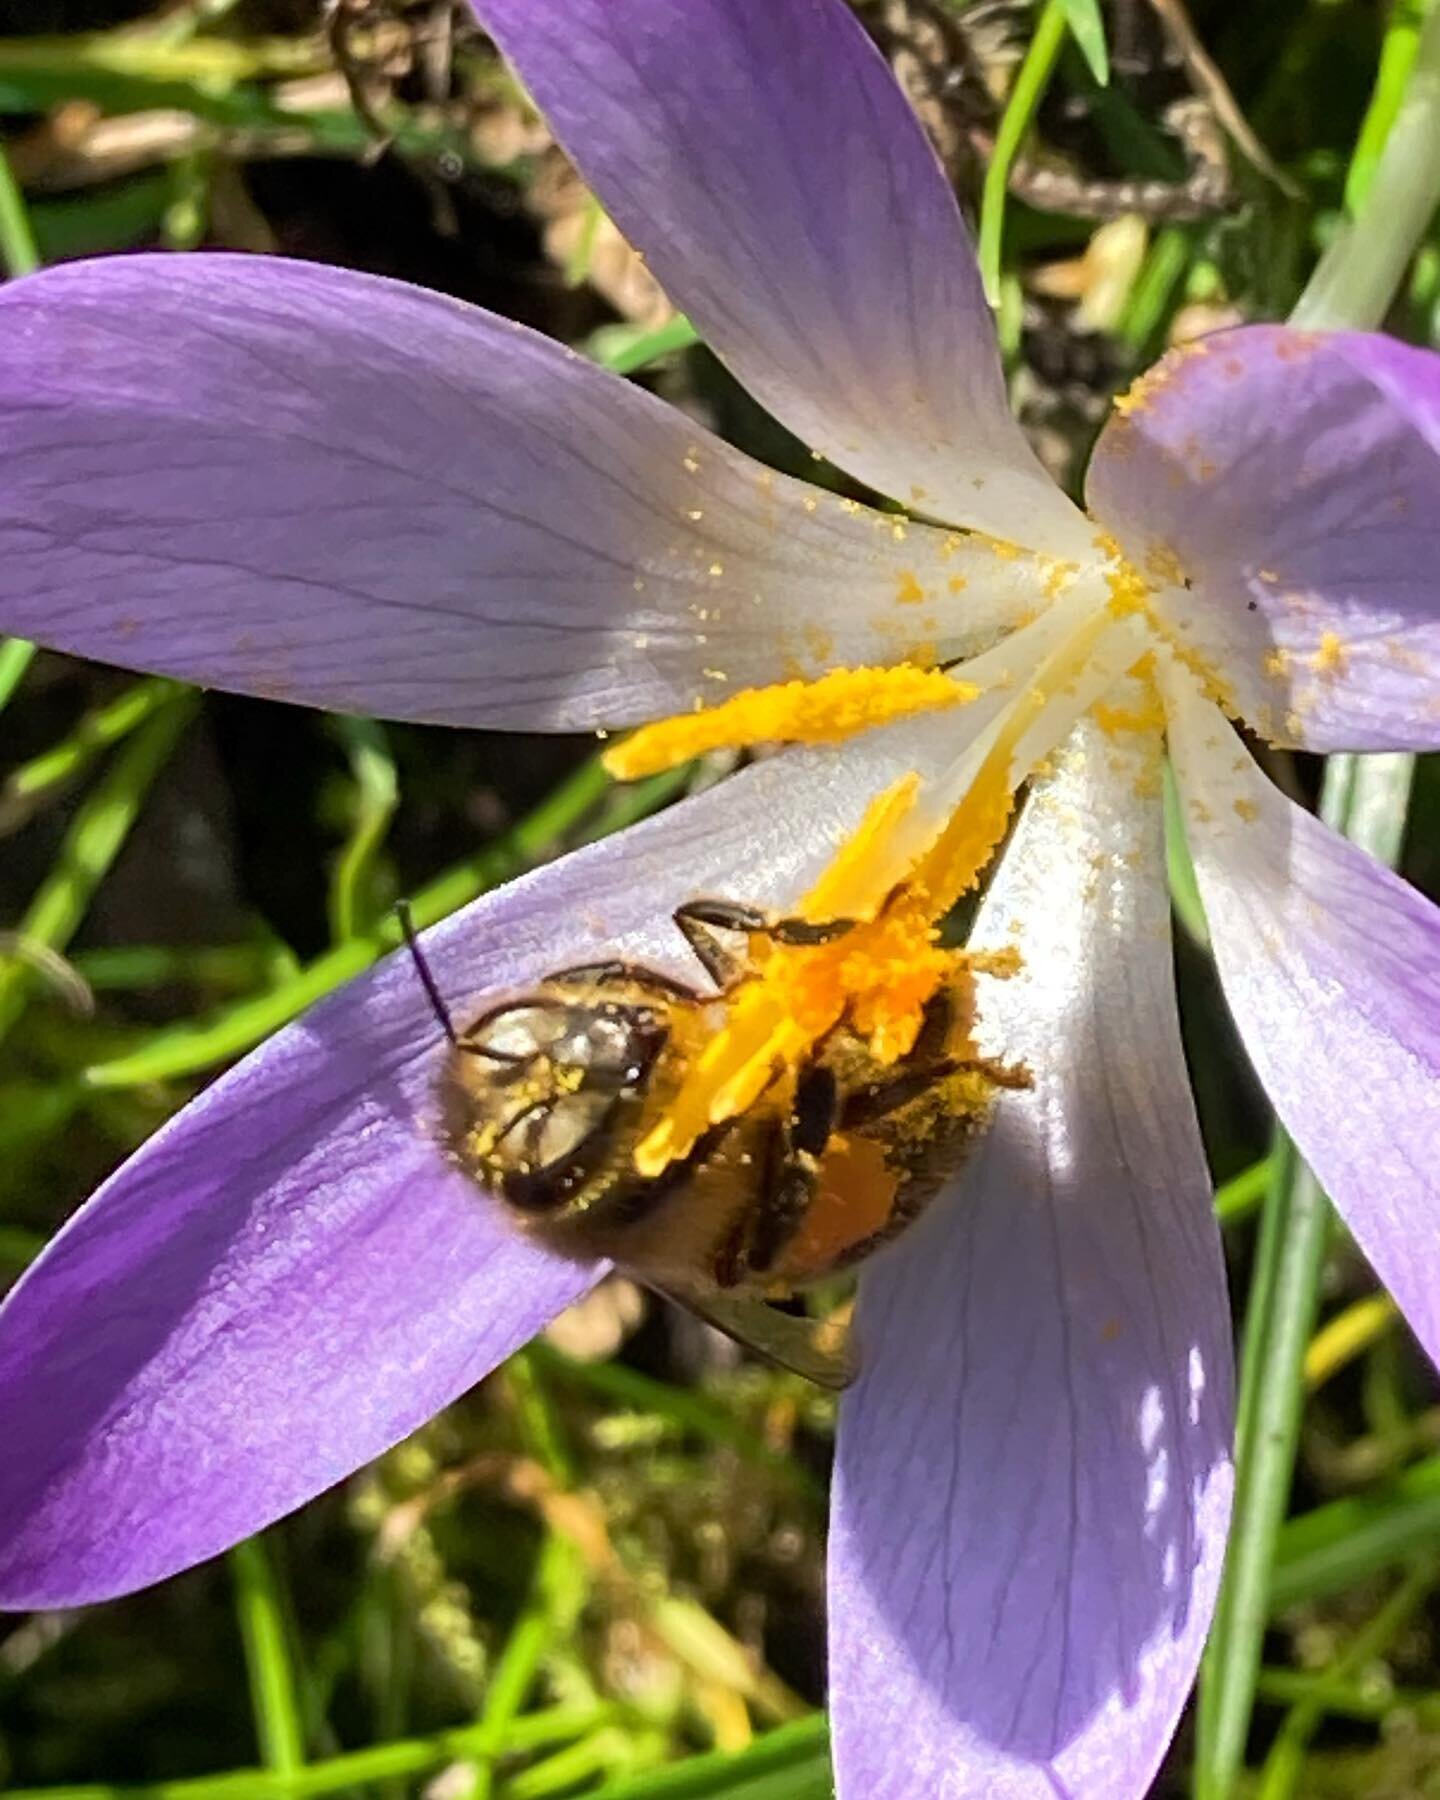 This honey bee is really getting stuck in, check out the pollen everywhere! Laden! 💛🧡💛🧡#honeybee #crocus #pollen #ditchling #springbulbs #organicgardening